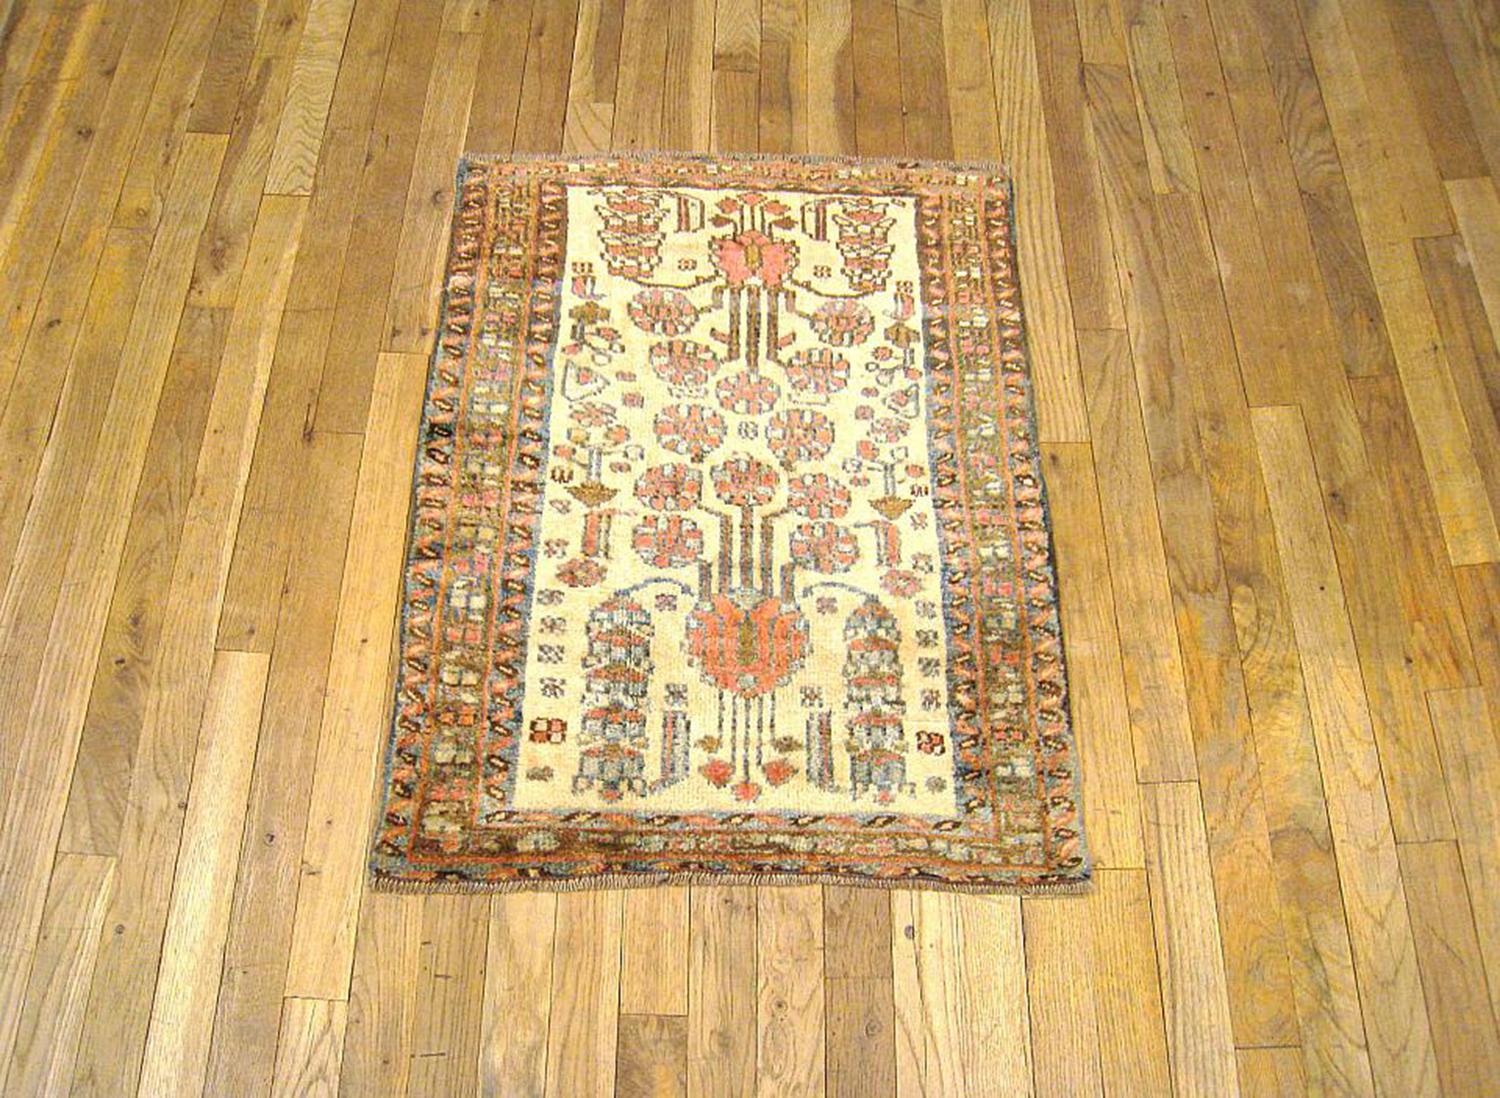 An antique Persian Hamadan oriental rug, size 2'9 H x 2'2 W, circa 1920. This lovely handwoven rug features an ivory central field, which is rare for this type of rug in this size, and a stylized design of flower heads and floral sprays. The central